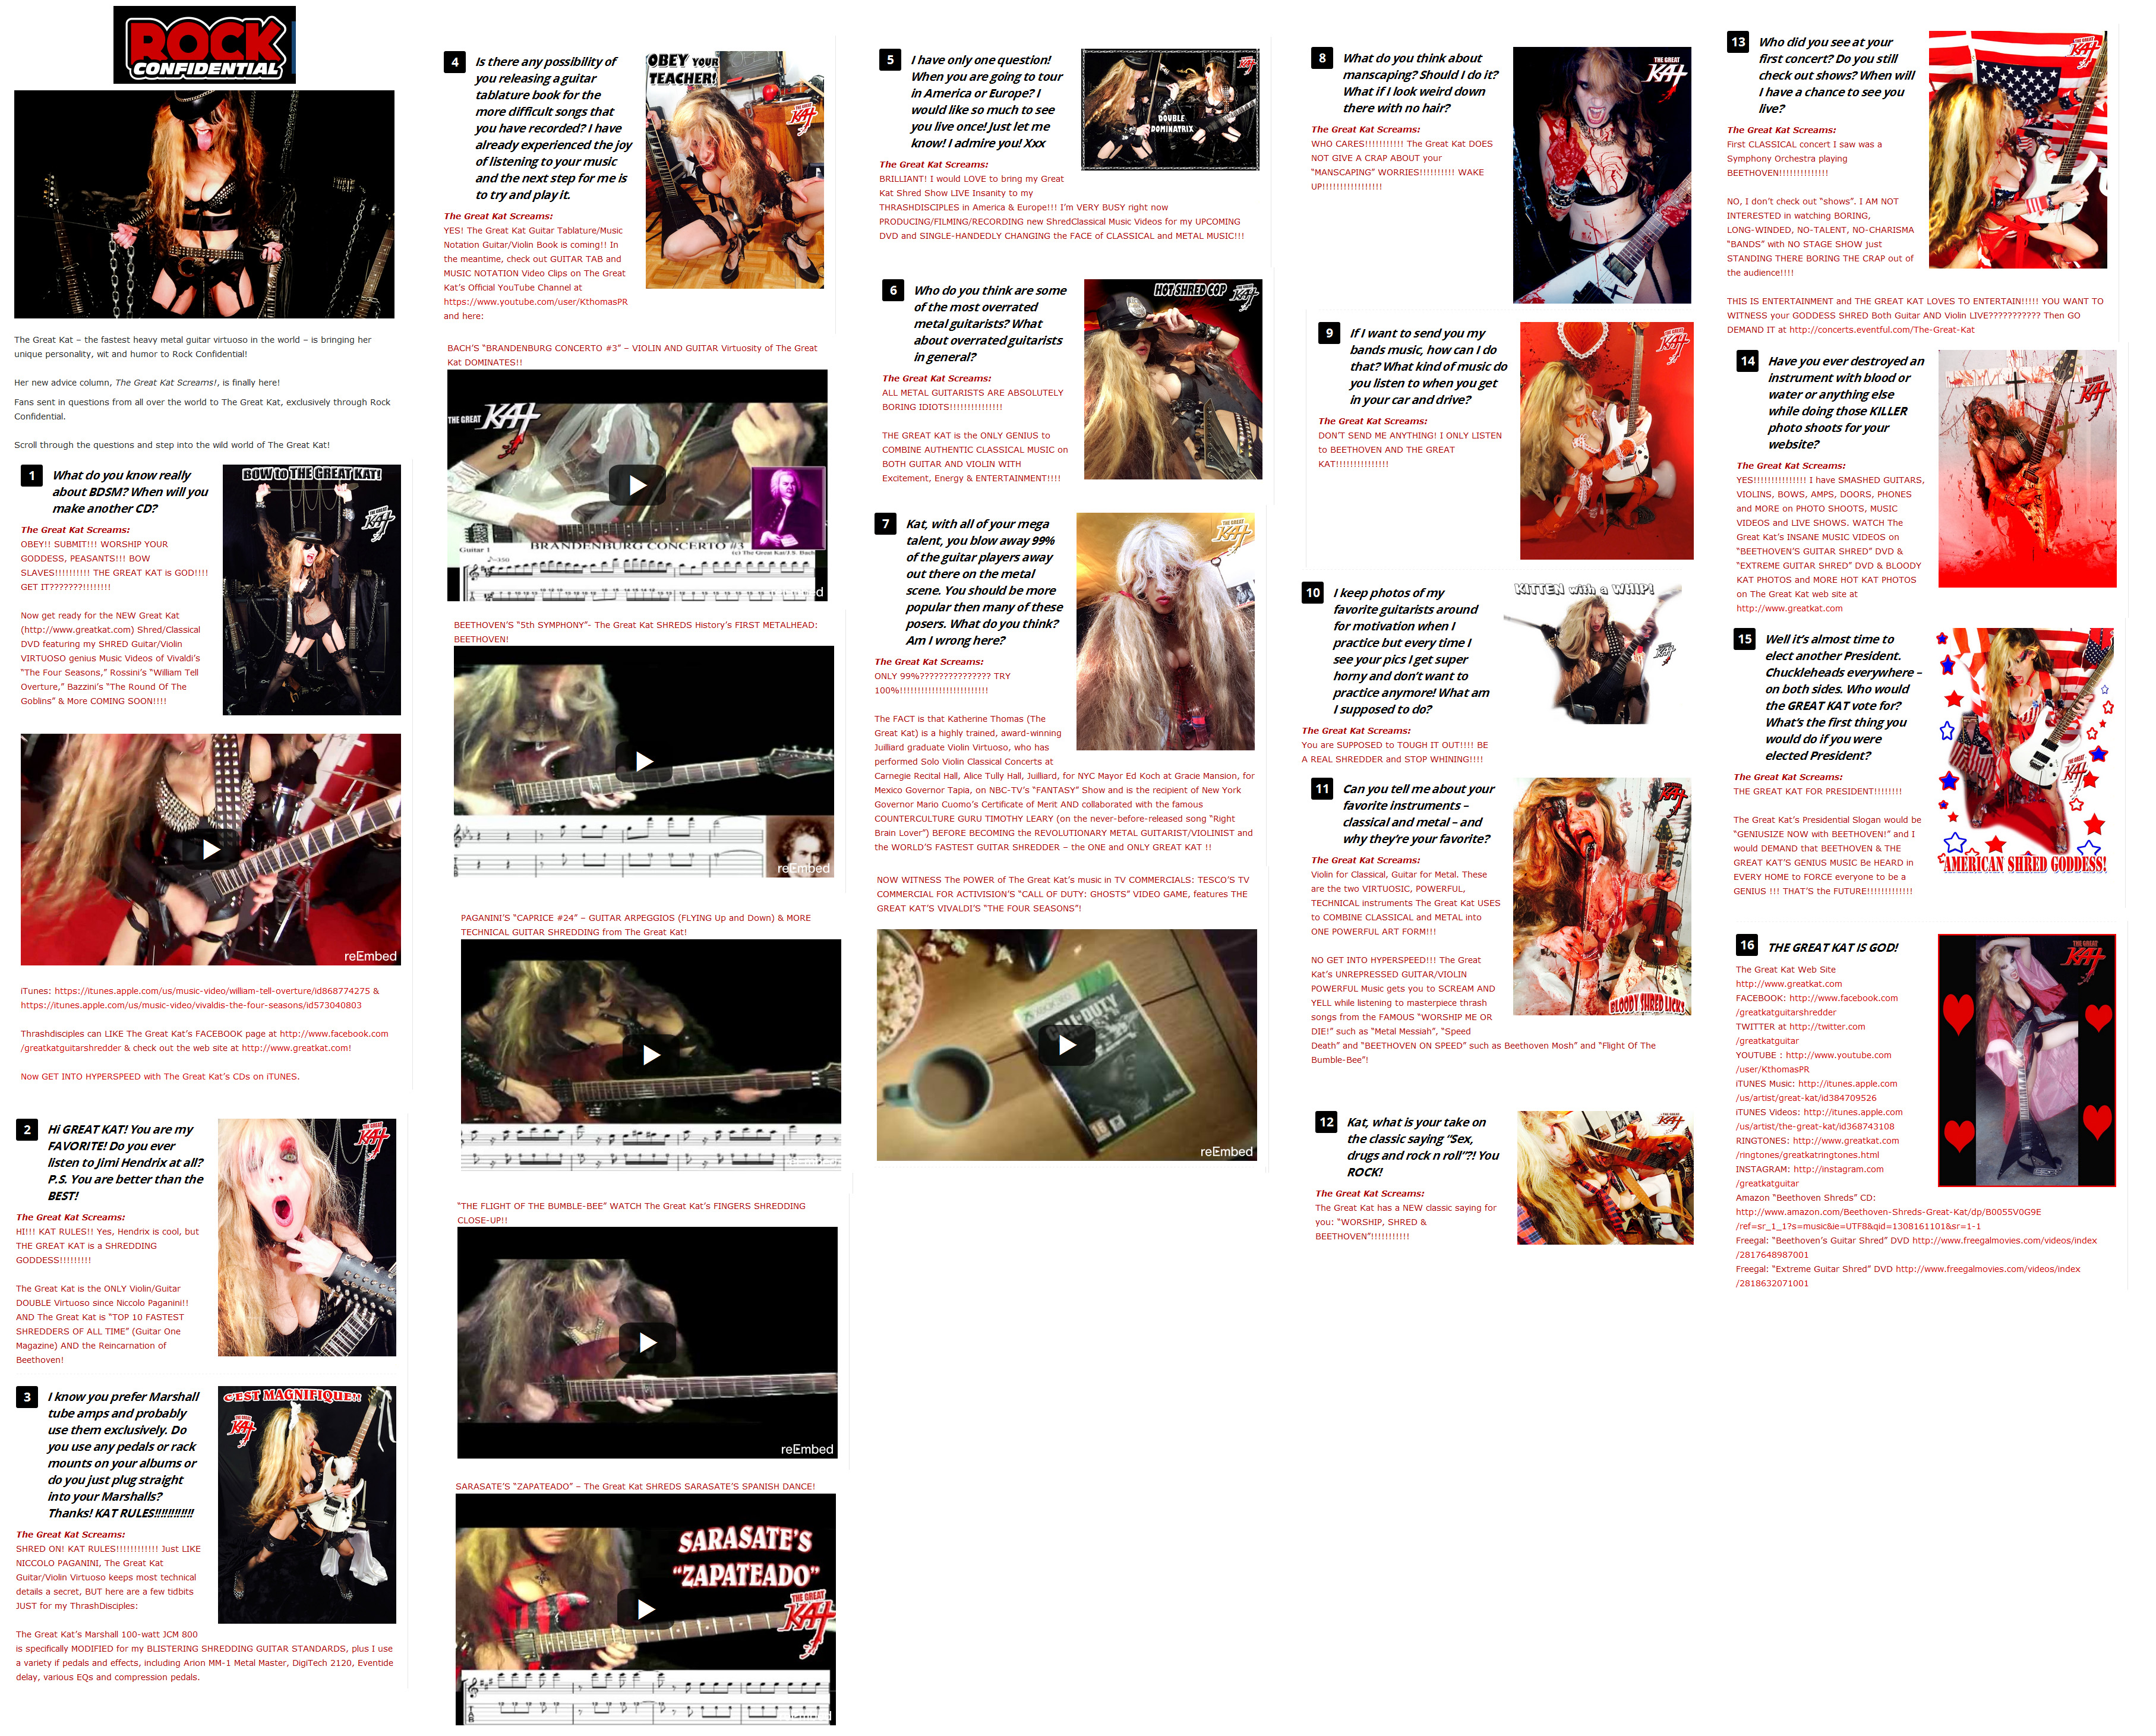 ROCK CONFIDENTIAL PREMIERES EXCLUSIVE COLUMN "THE GREAT KAT SCREAMS!" "The Great Kat  the fastest heavy metal guitar virtuoso in the world  is bringing her unique personality, wit and humor to Rock Confidential! Her new advice column, The Great Kat Screams!, is finally here! Fans sent in questions from all over the world to The Great Kat, exclusively through Rock Confidential. Scroll through the questions and step into the wild world of The Great Kat!" - Jesse Capps, Rock Confidential